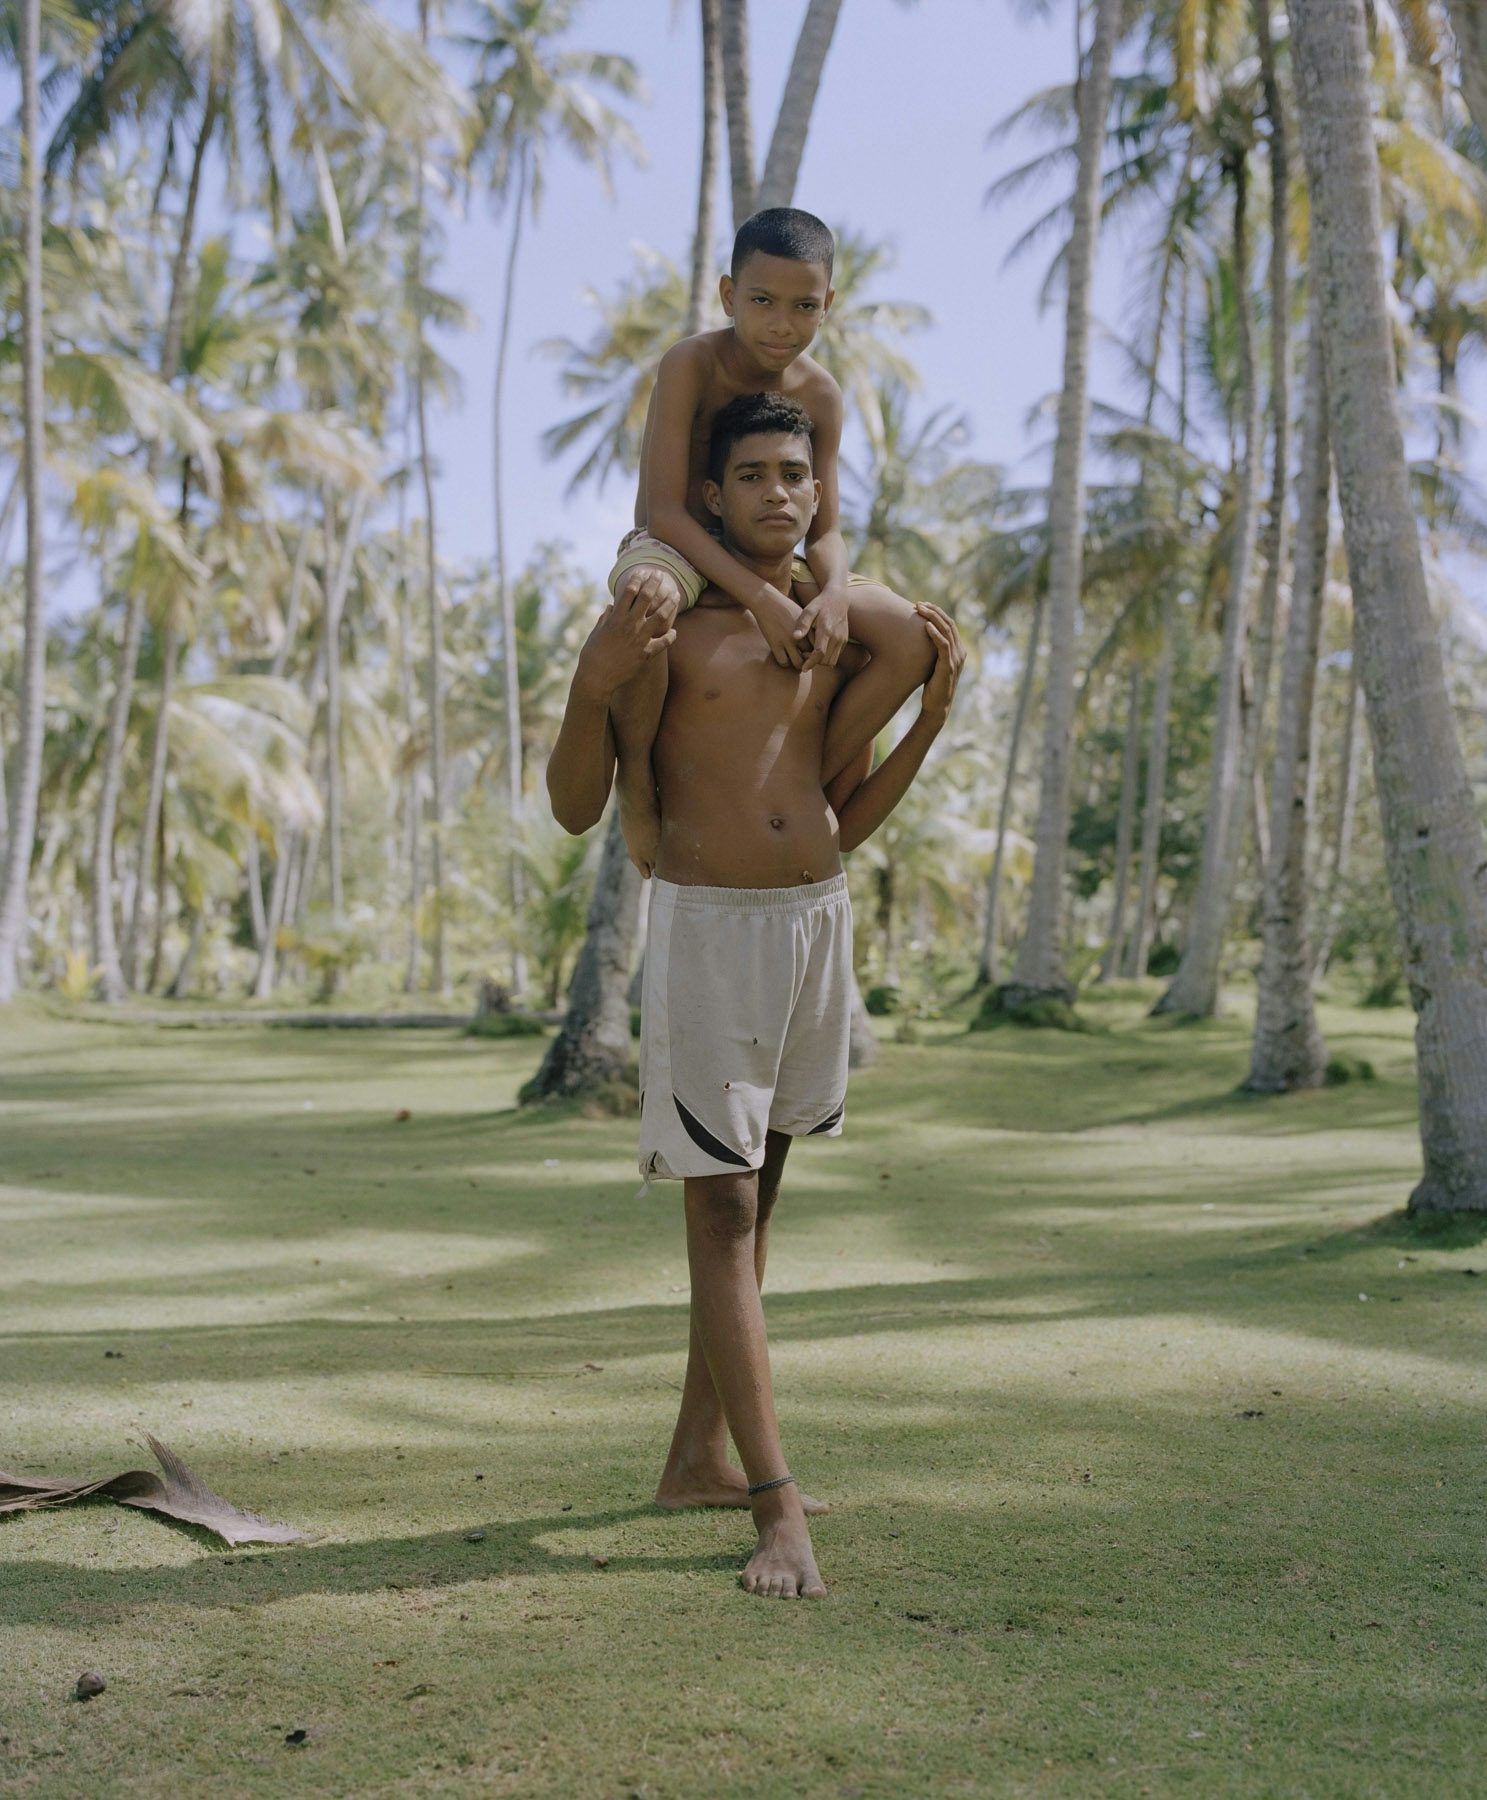 Image by Silvana Trevale of a young shirtless man stood among trees with a child on his shoulders